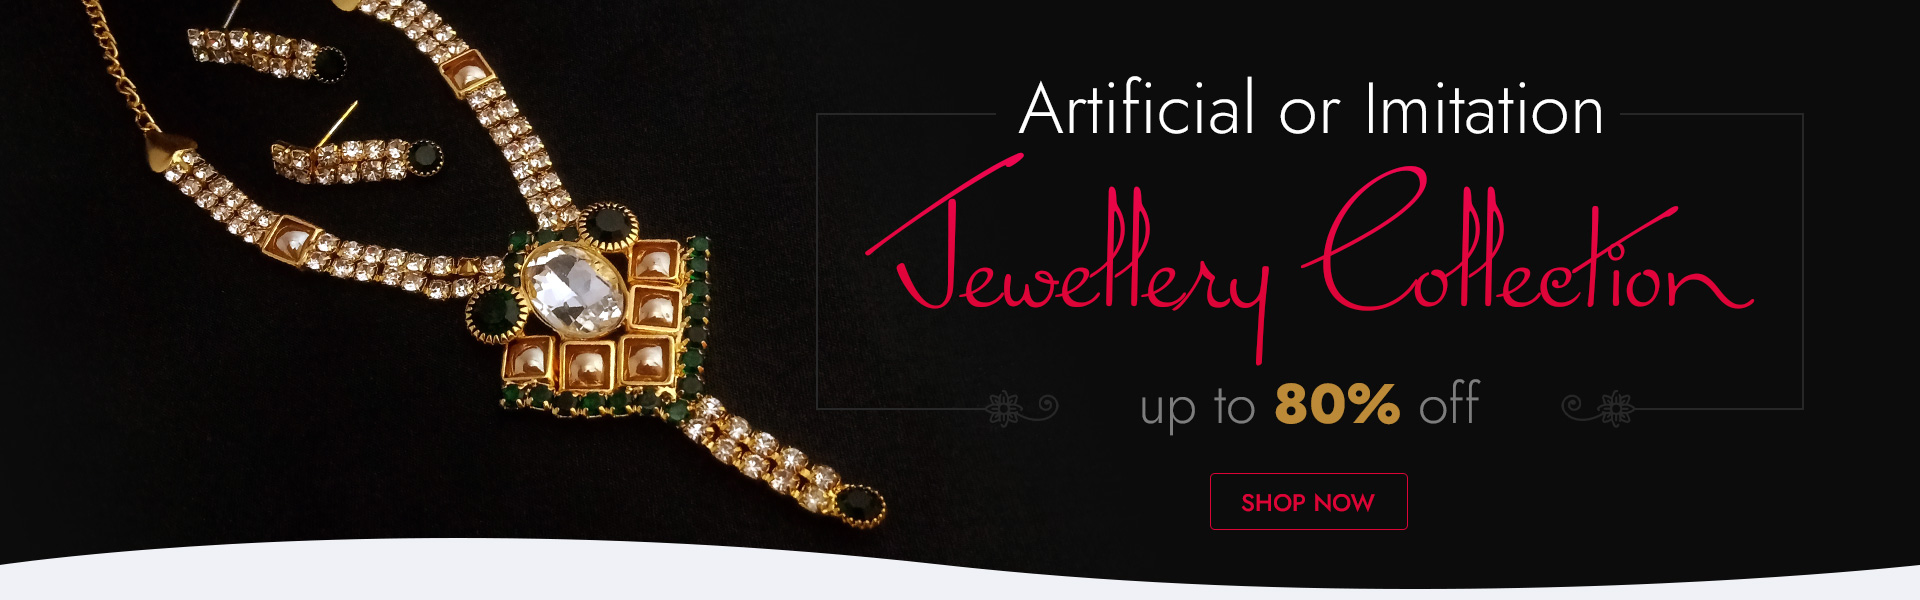 Artificial or Imitation Jewellery Collection up to 80% off